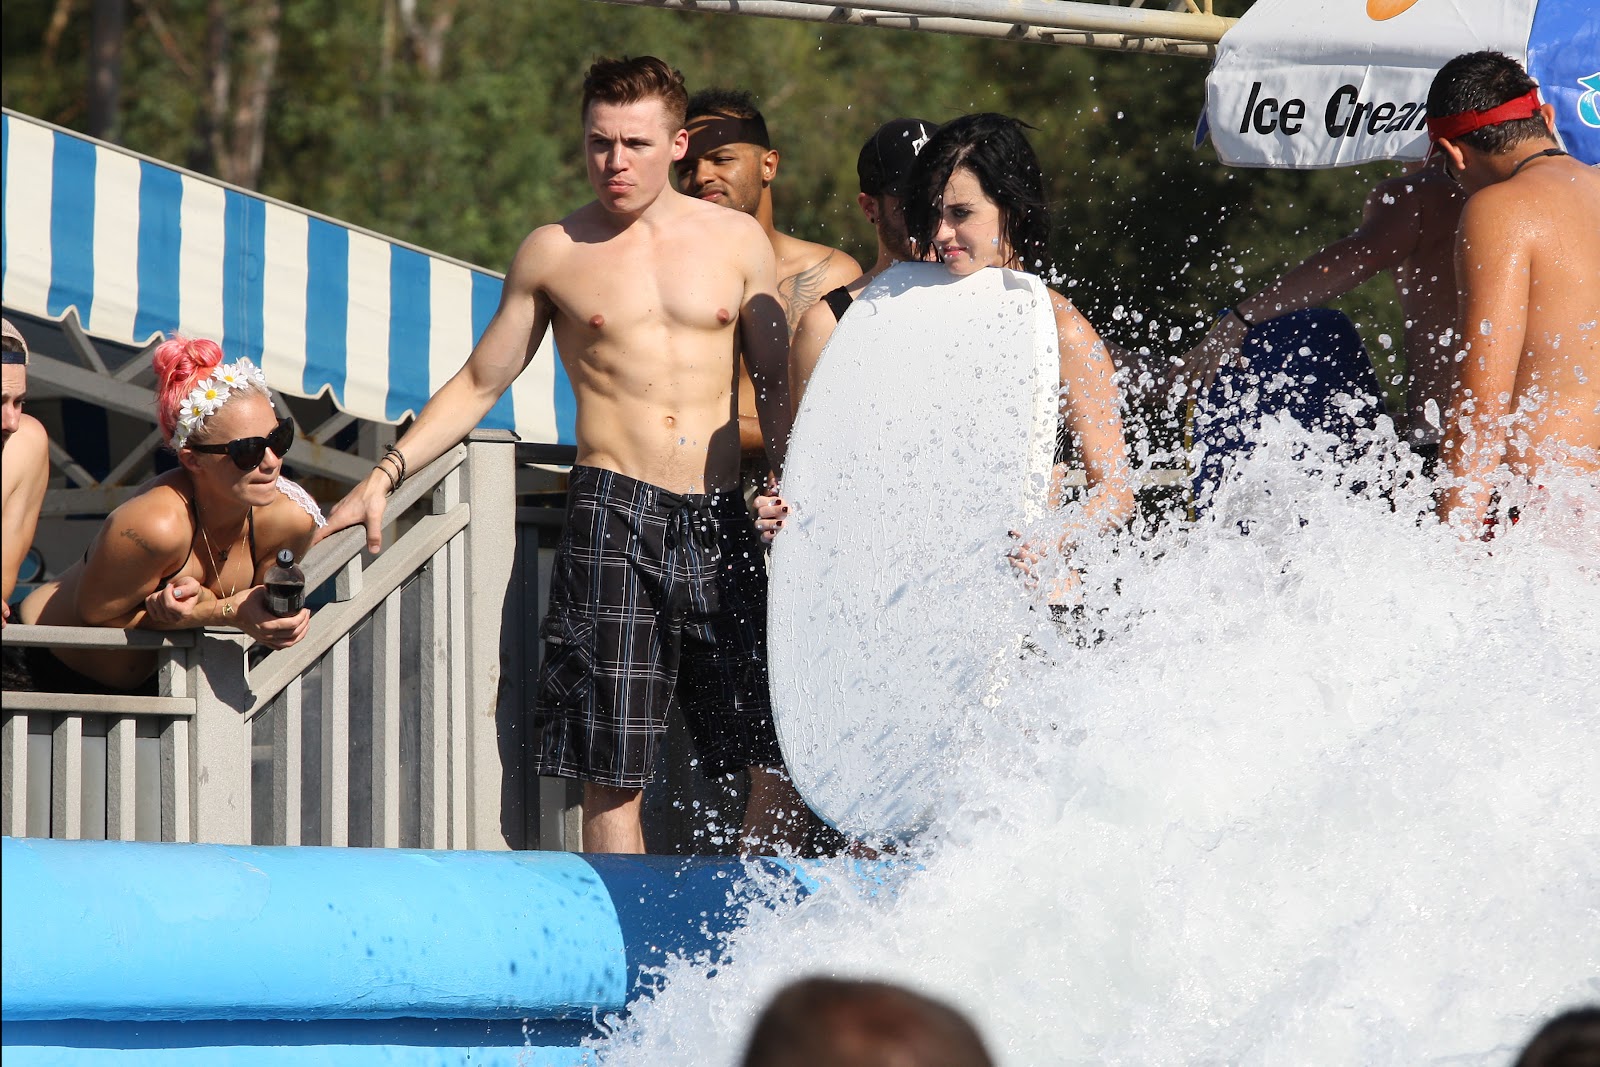 Katy Perry Suffers a Major Wardrobe Mishap Going Down a Water Slide in San Dimas